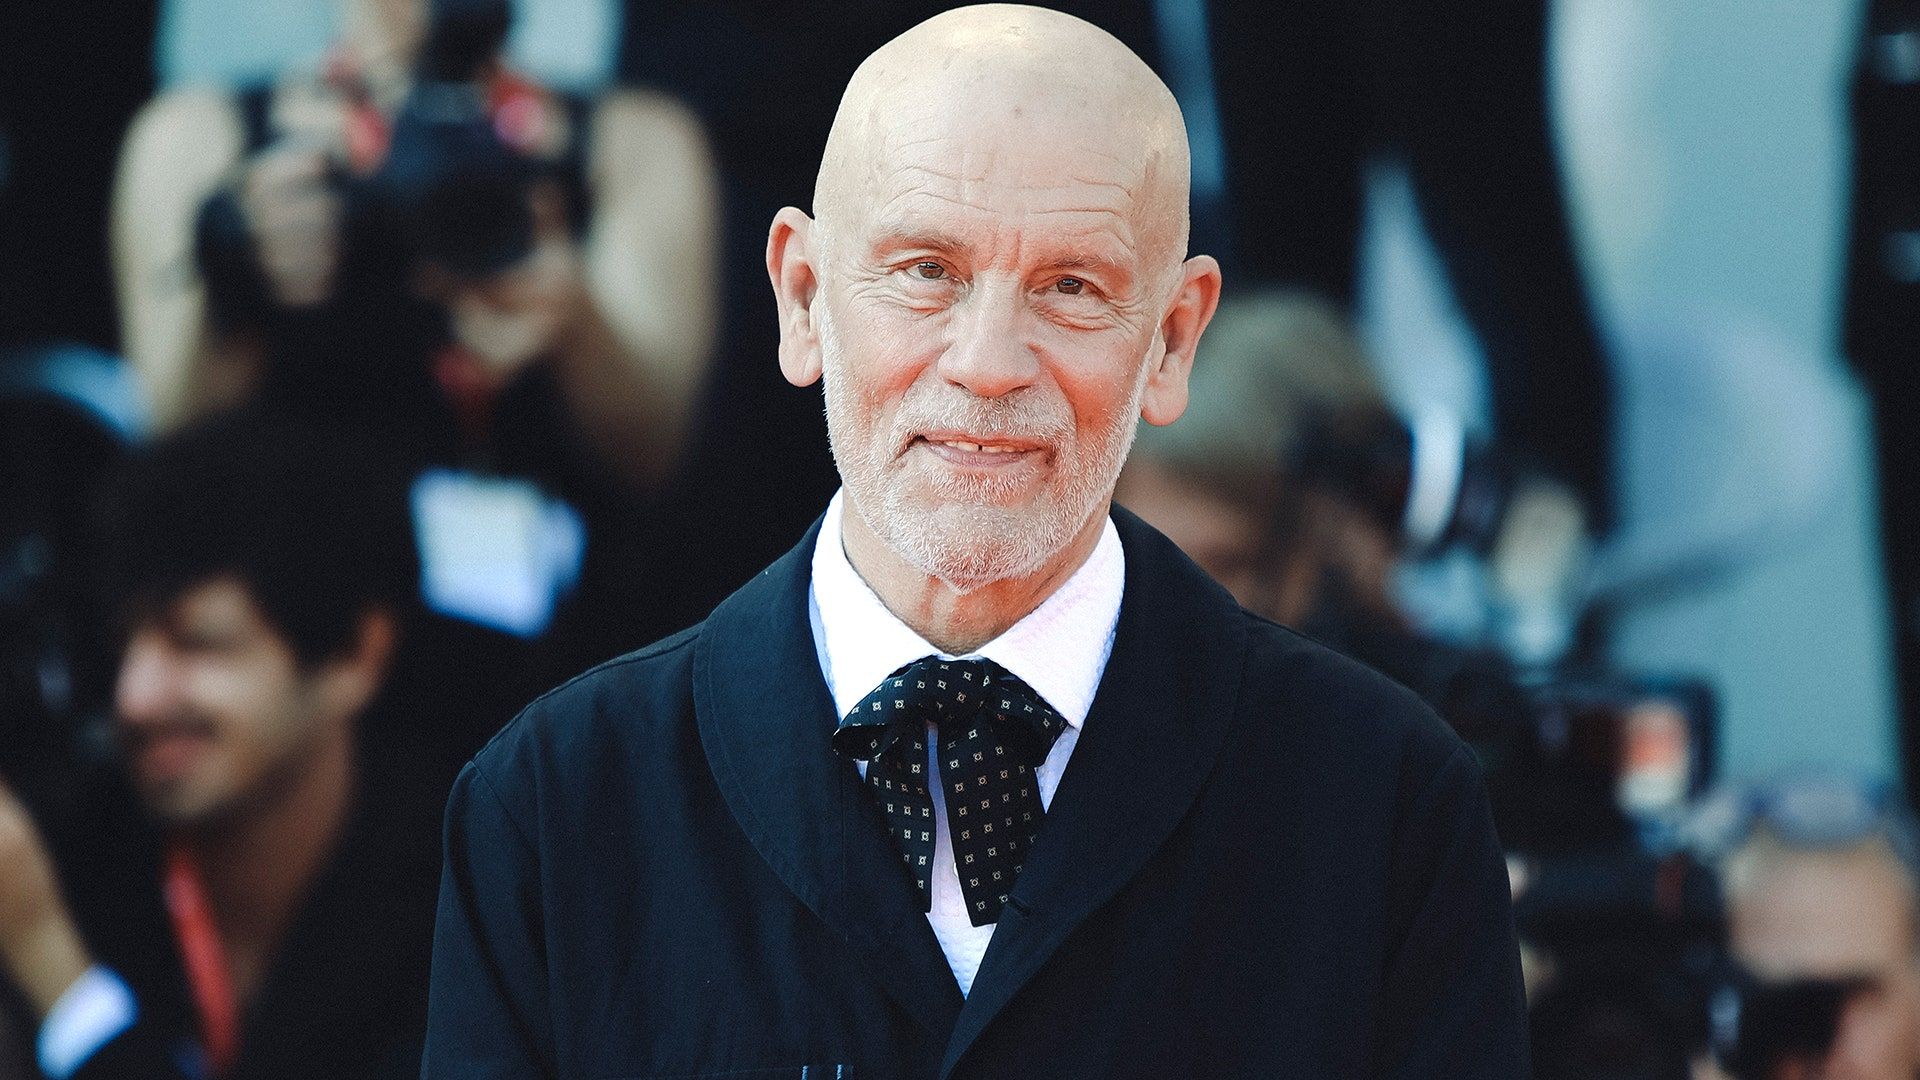 John Malkovich on 'Space Force' and his favourite roles